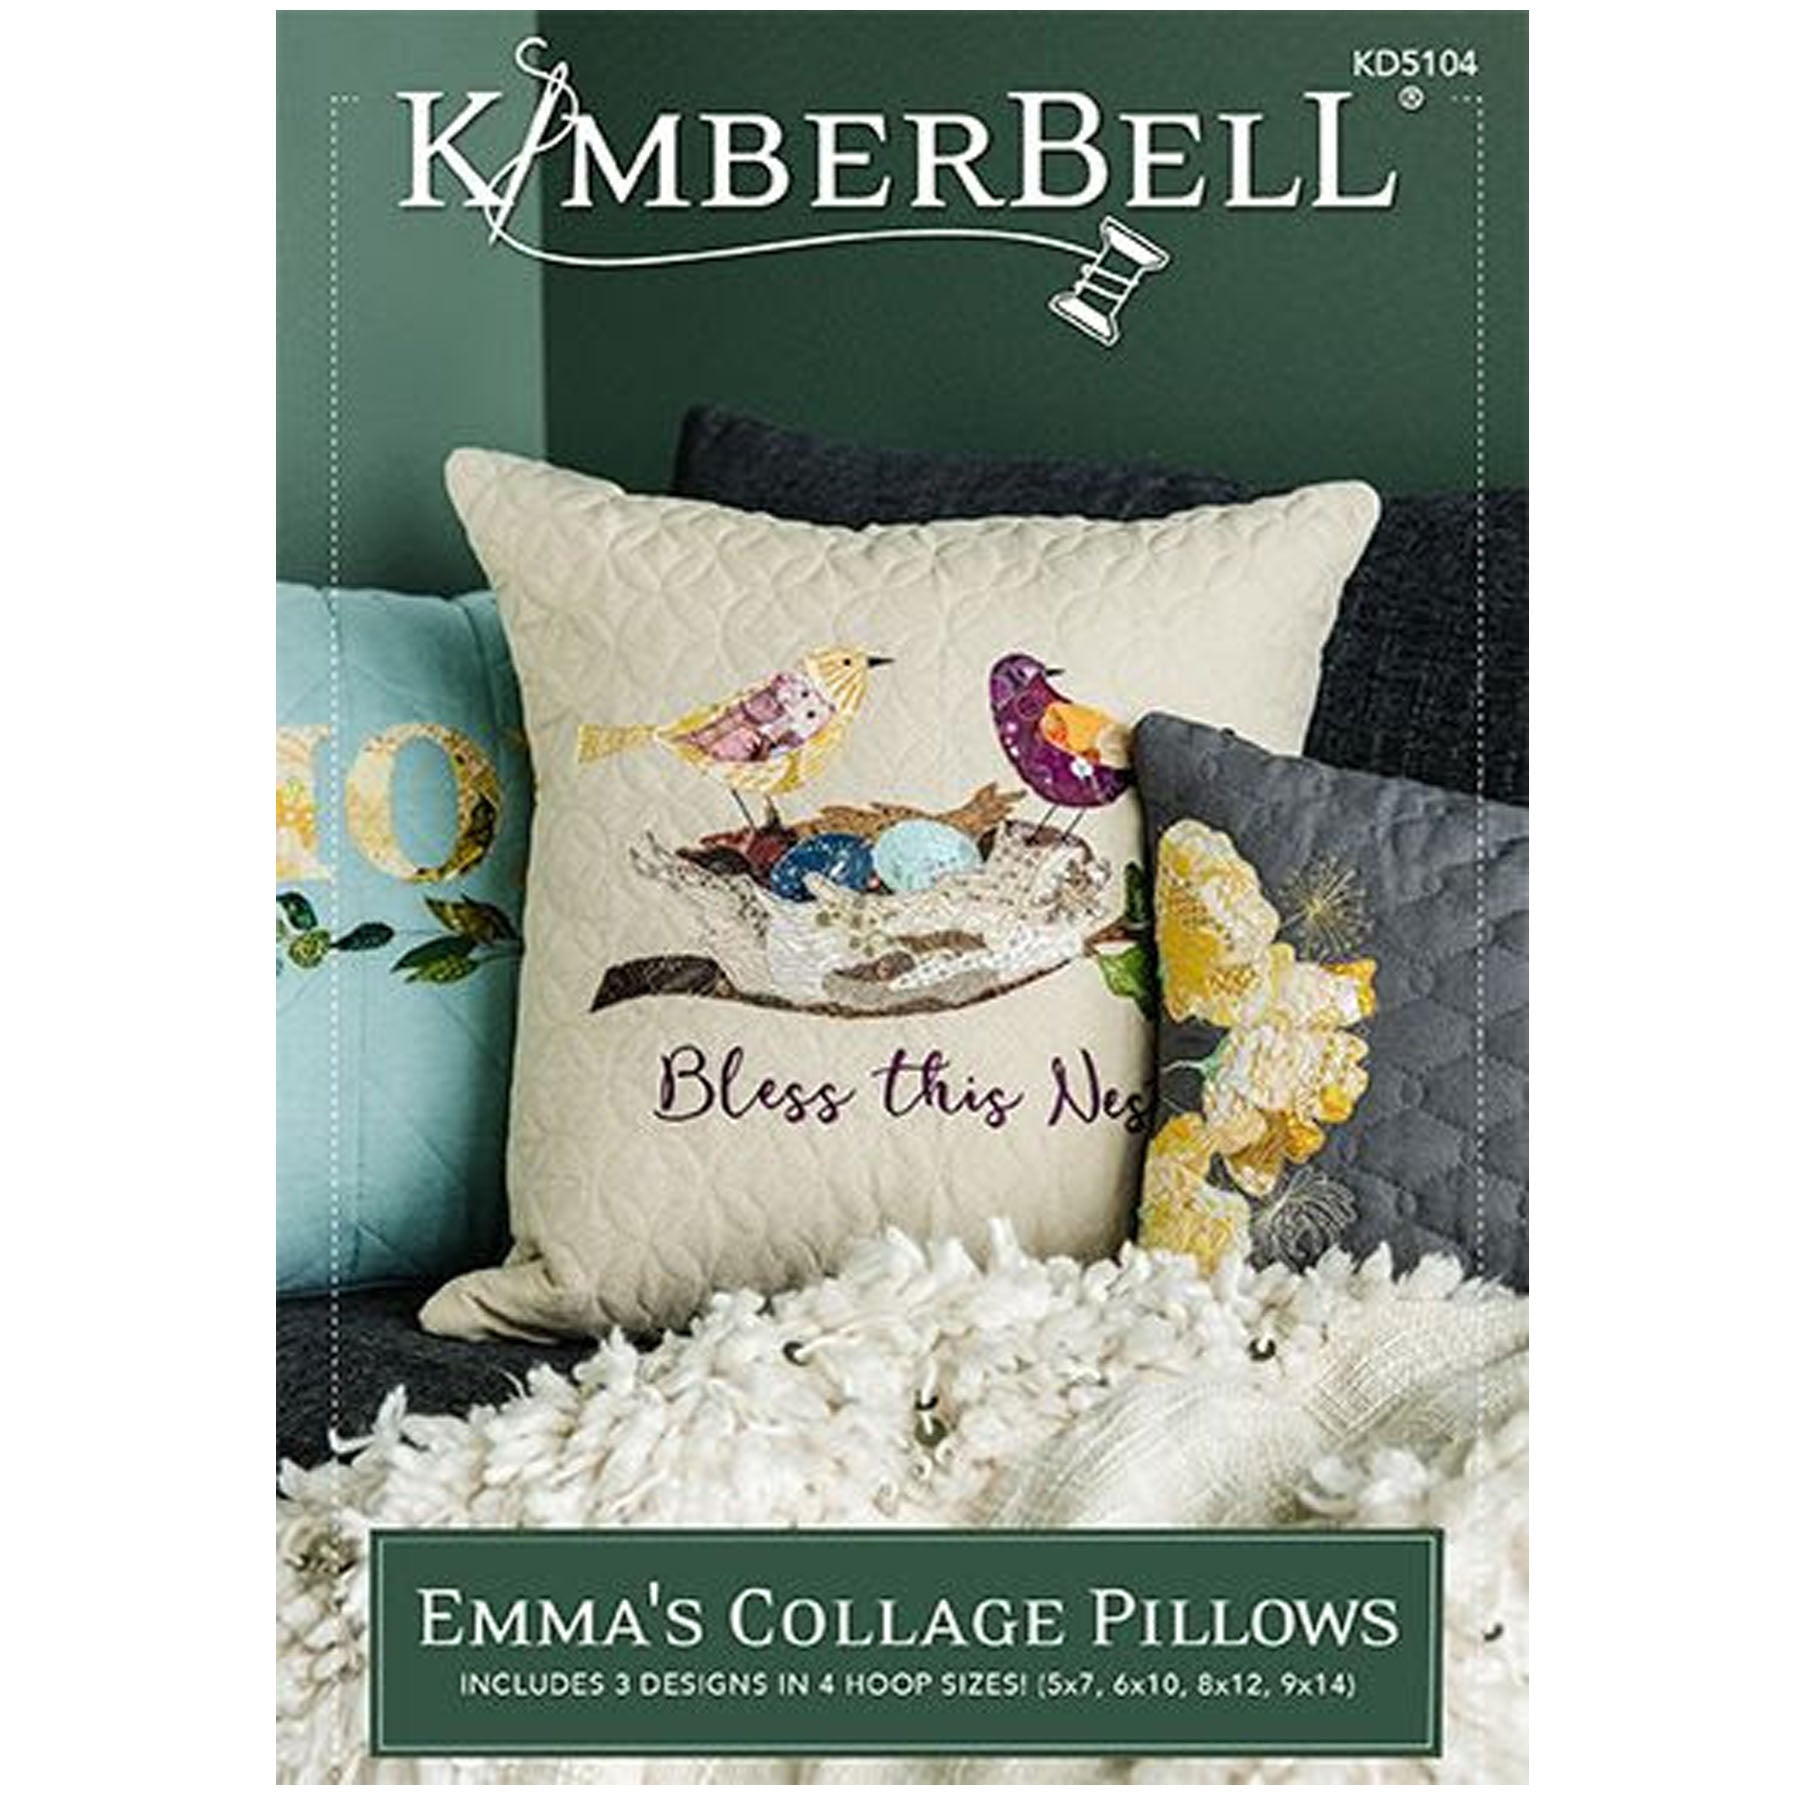 Emma's Collage Pillows Embroidery Design CD by Kimberbell